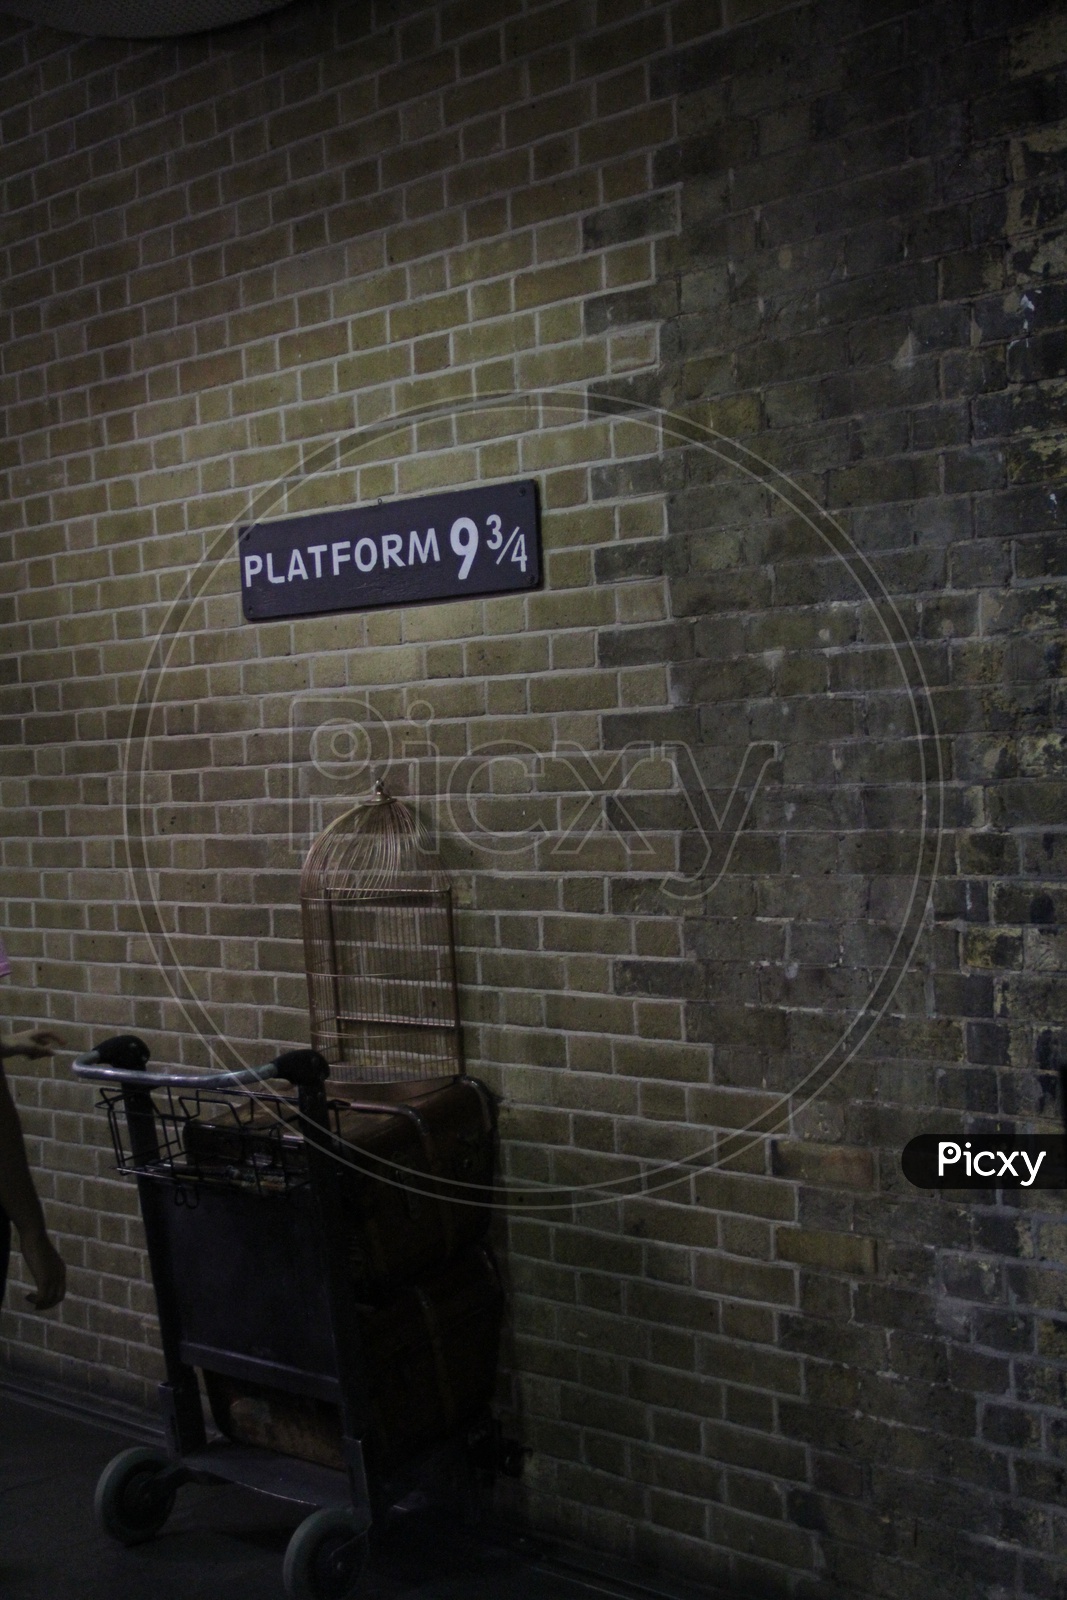 The sign for Platform 9 3/4 from Harry Potter movie in King's Cross Station